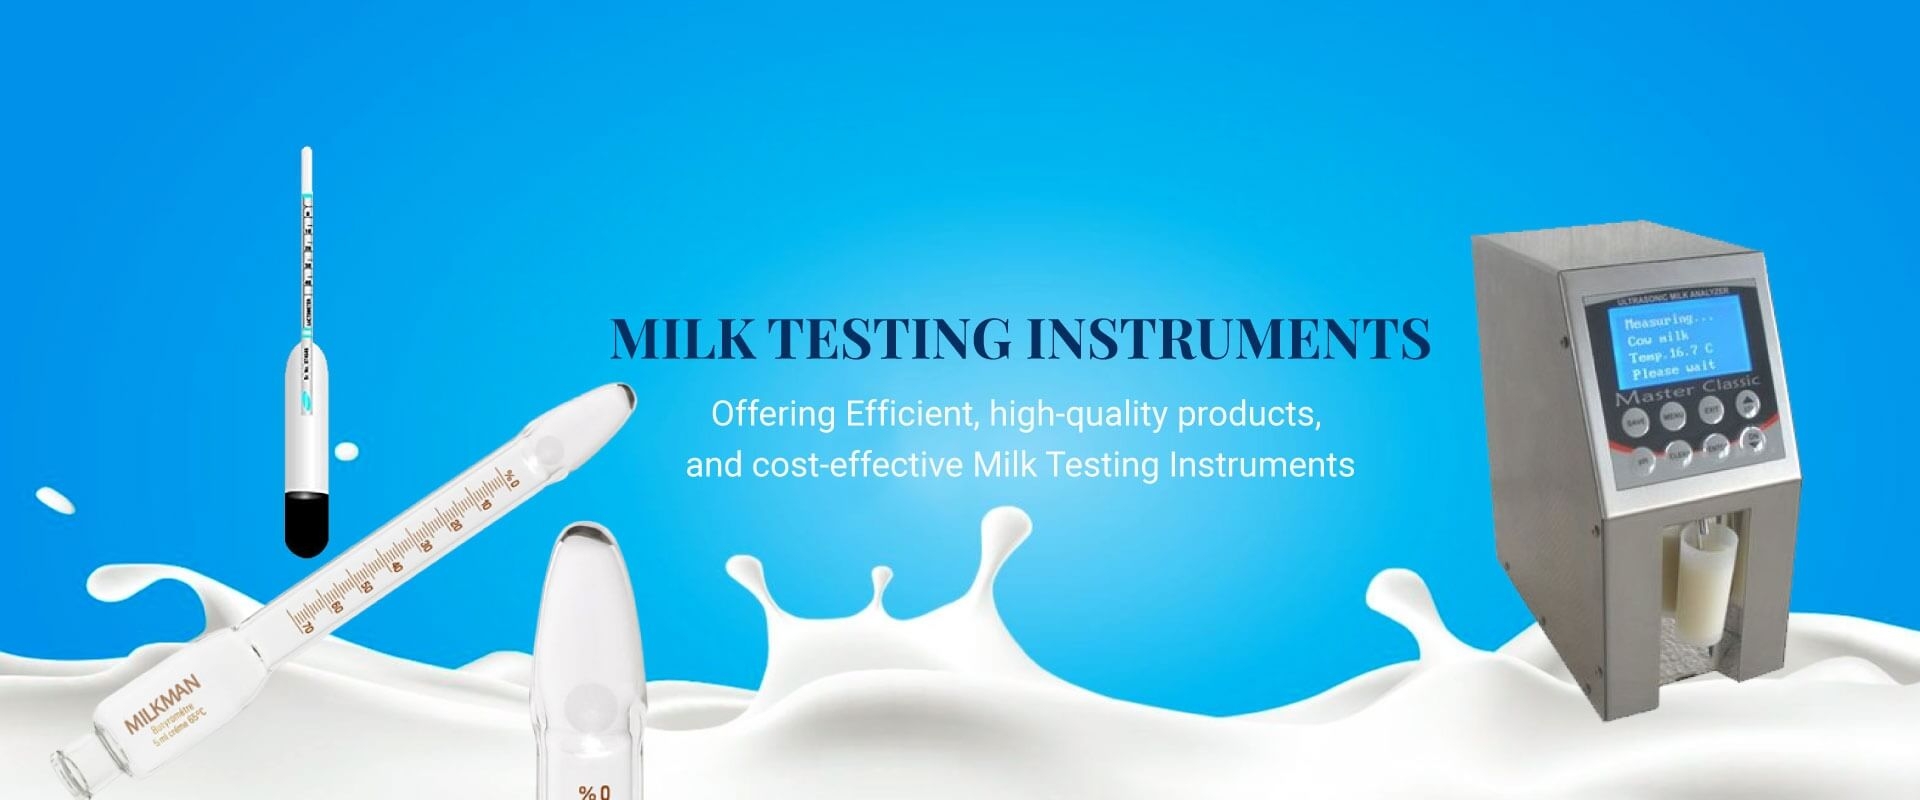 Milk Testing Instruments in Hungary